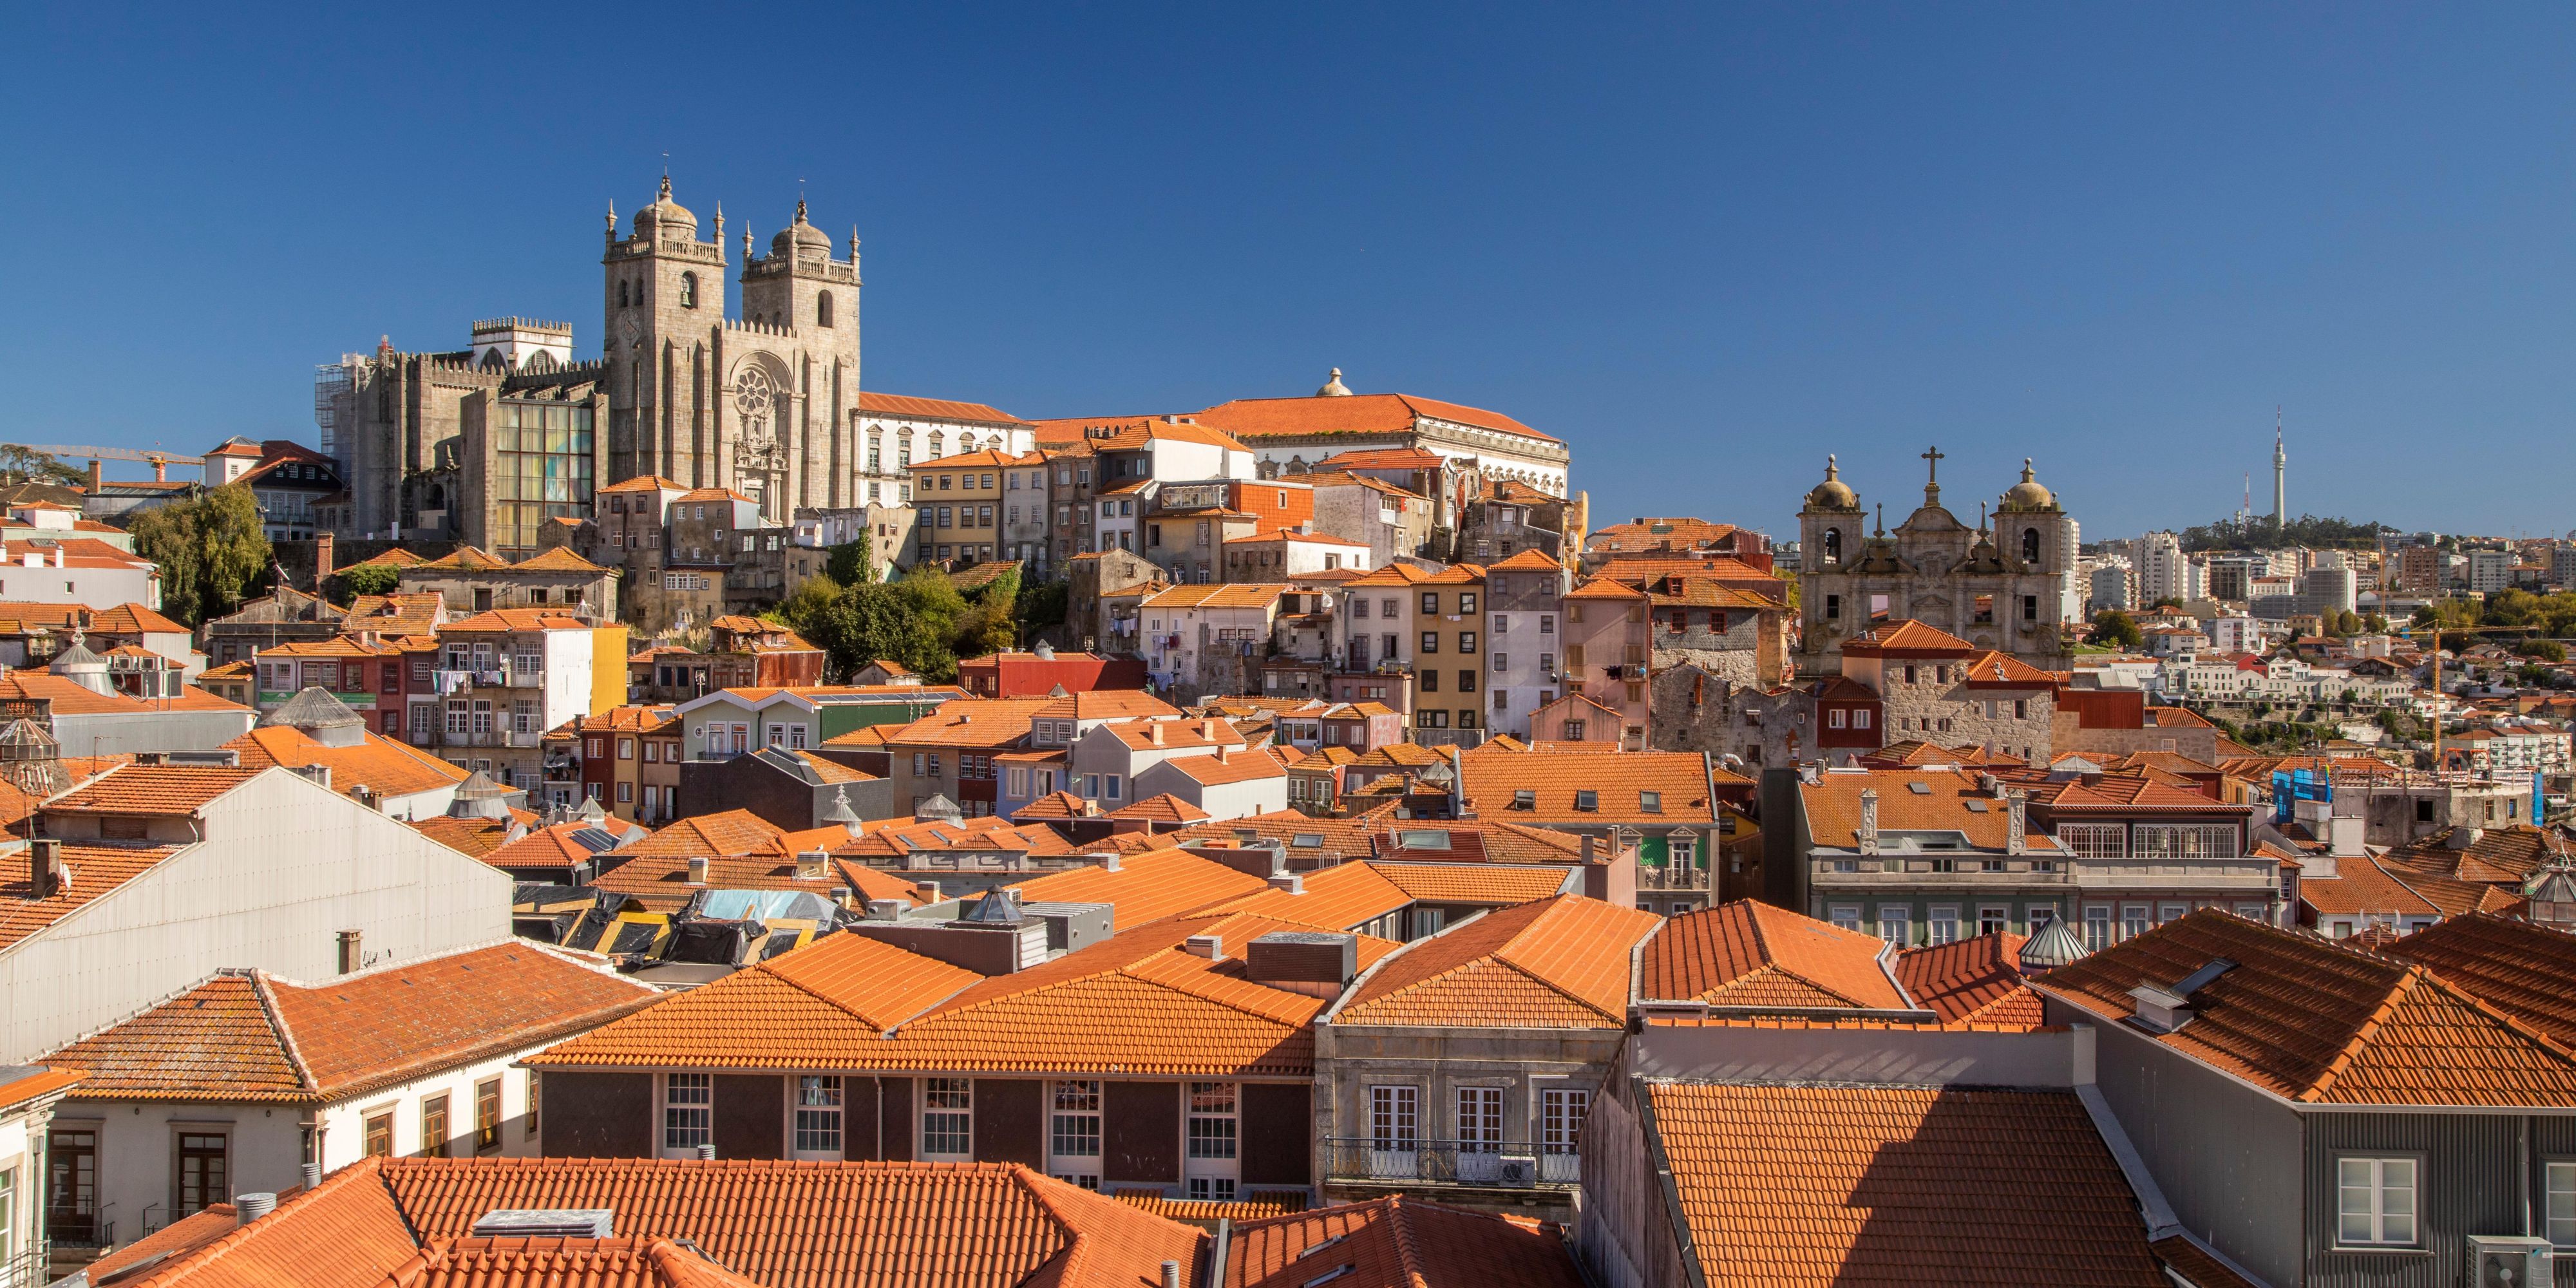 We believe travel should benefit local people and places. Casa da Companhia is proud to partner with Escola de Hotelaria e Turismo do Porto to support the next generation who wish to pursue careers in hospitality, through mentoring and internships at the hotel.